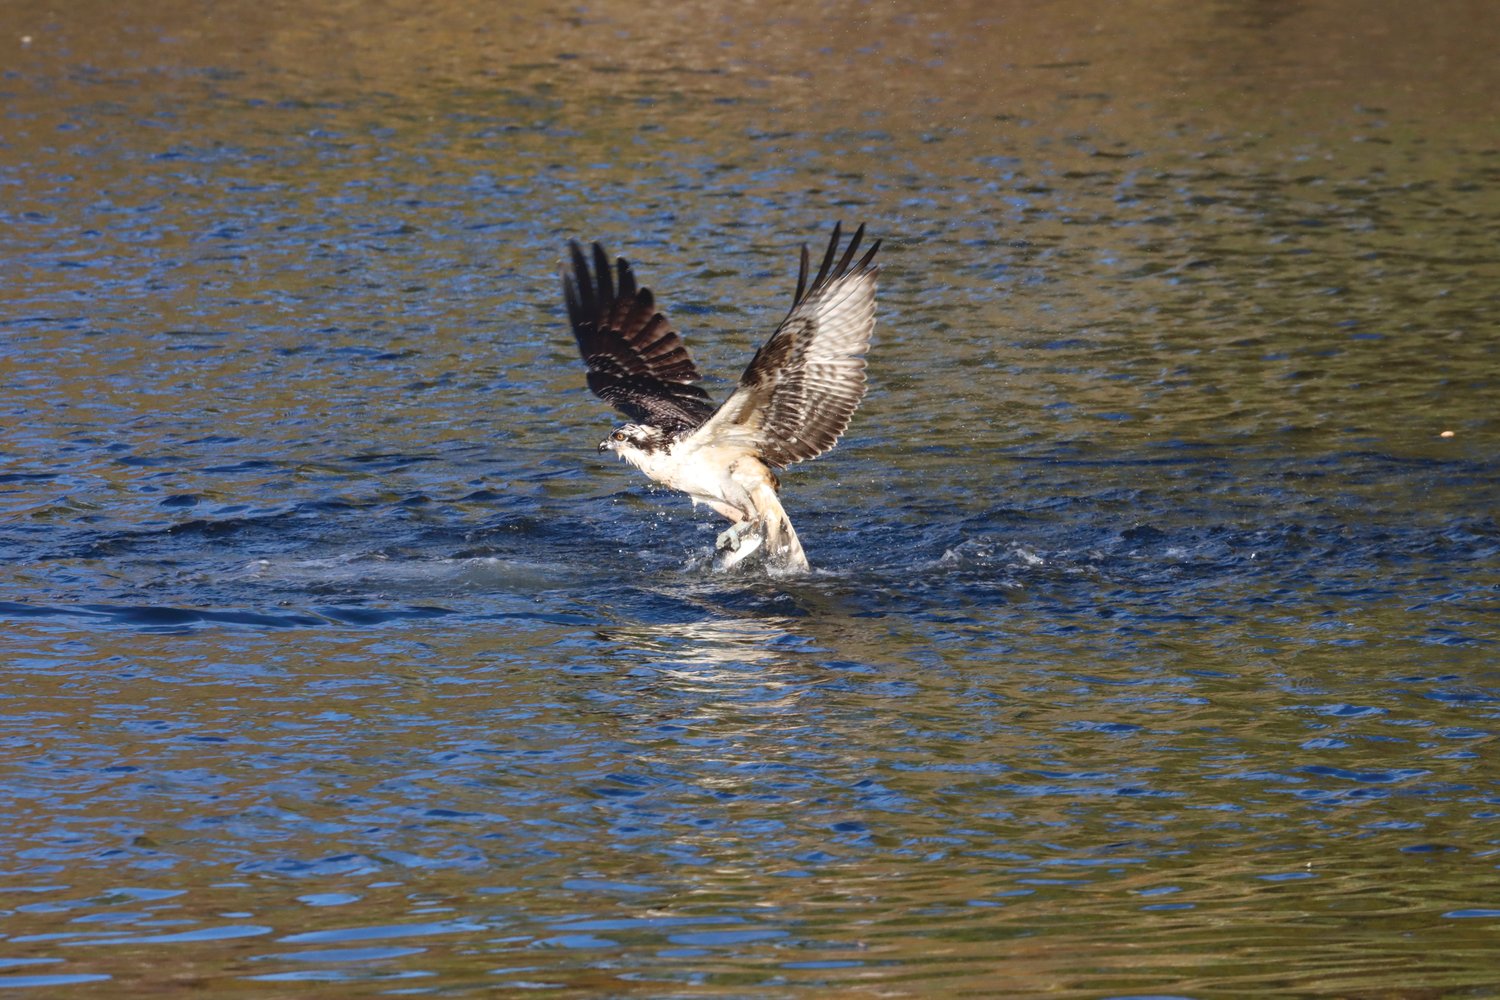 STILL HERE: Nature photographer Dave Chartier, whose bird images are occasionally featured in these pages, photographed this osprey making a catch in Apponaug Cove last week. Usually by this time osprey have flown south, but the fish are still here.